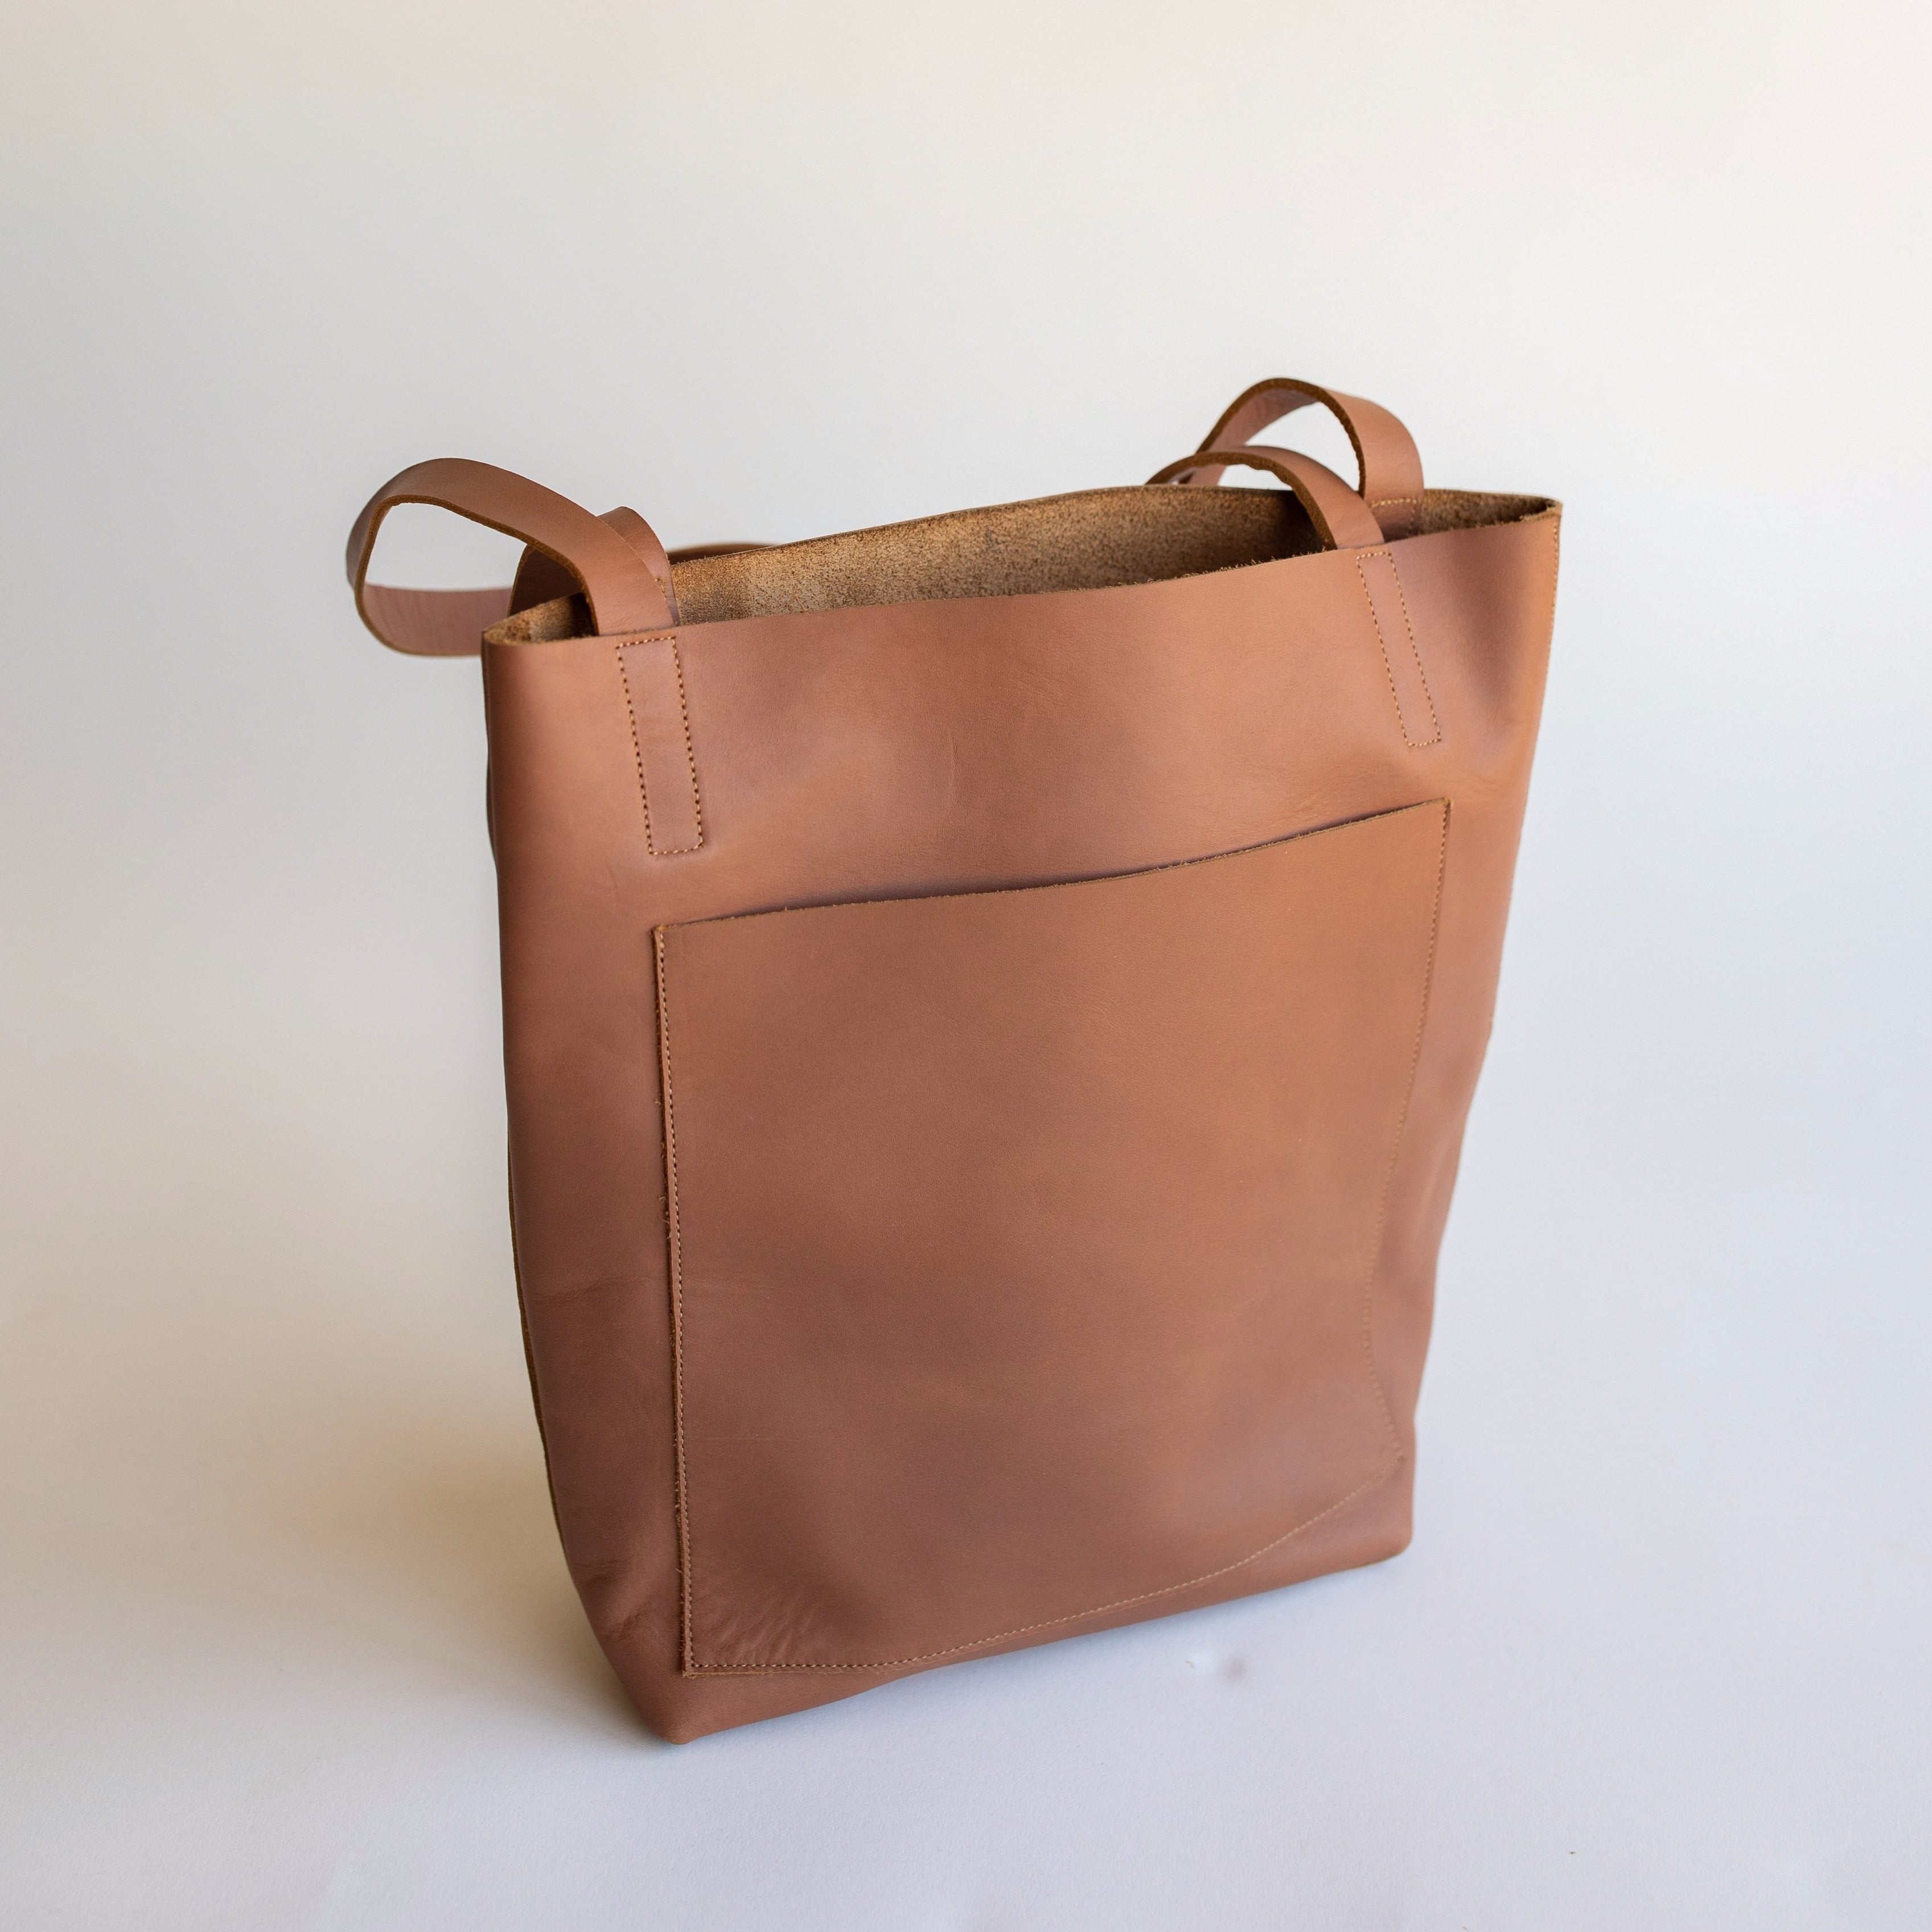 Mini Market Tote, Leather Bags for Women